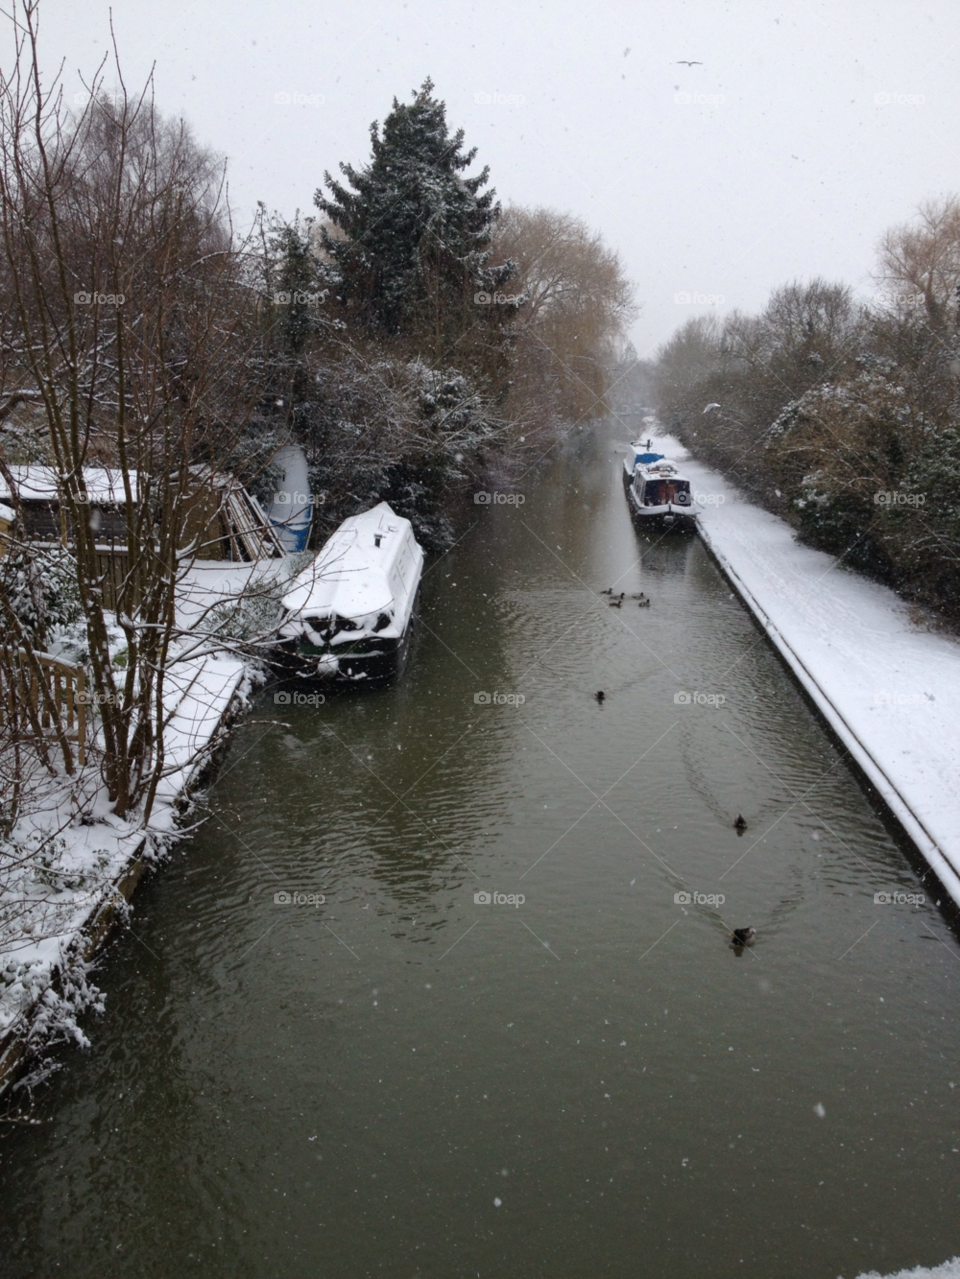 snow boats canal winter landscape by marina1